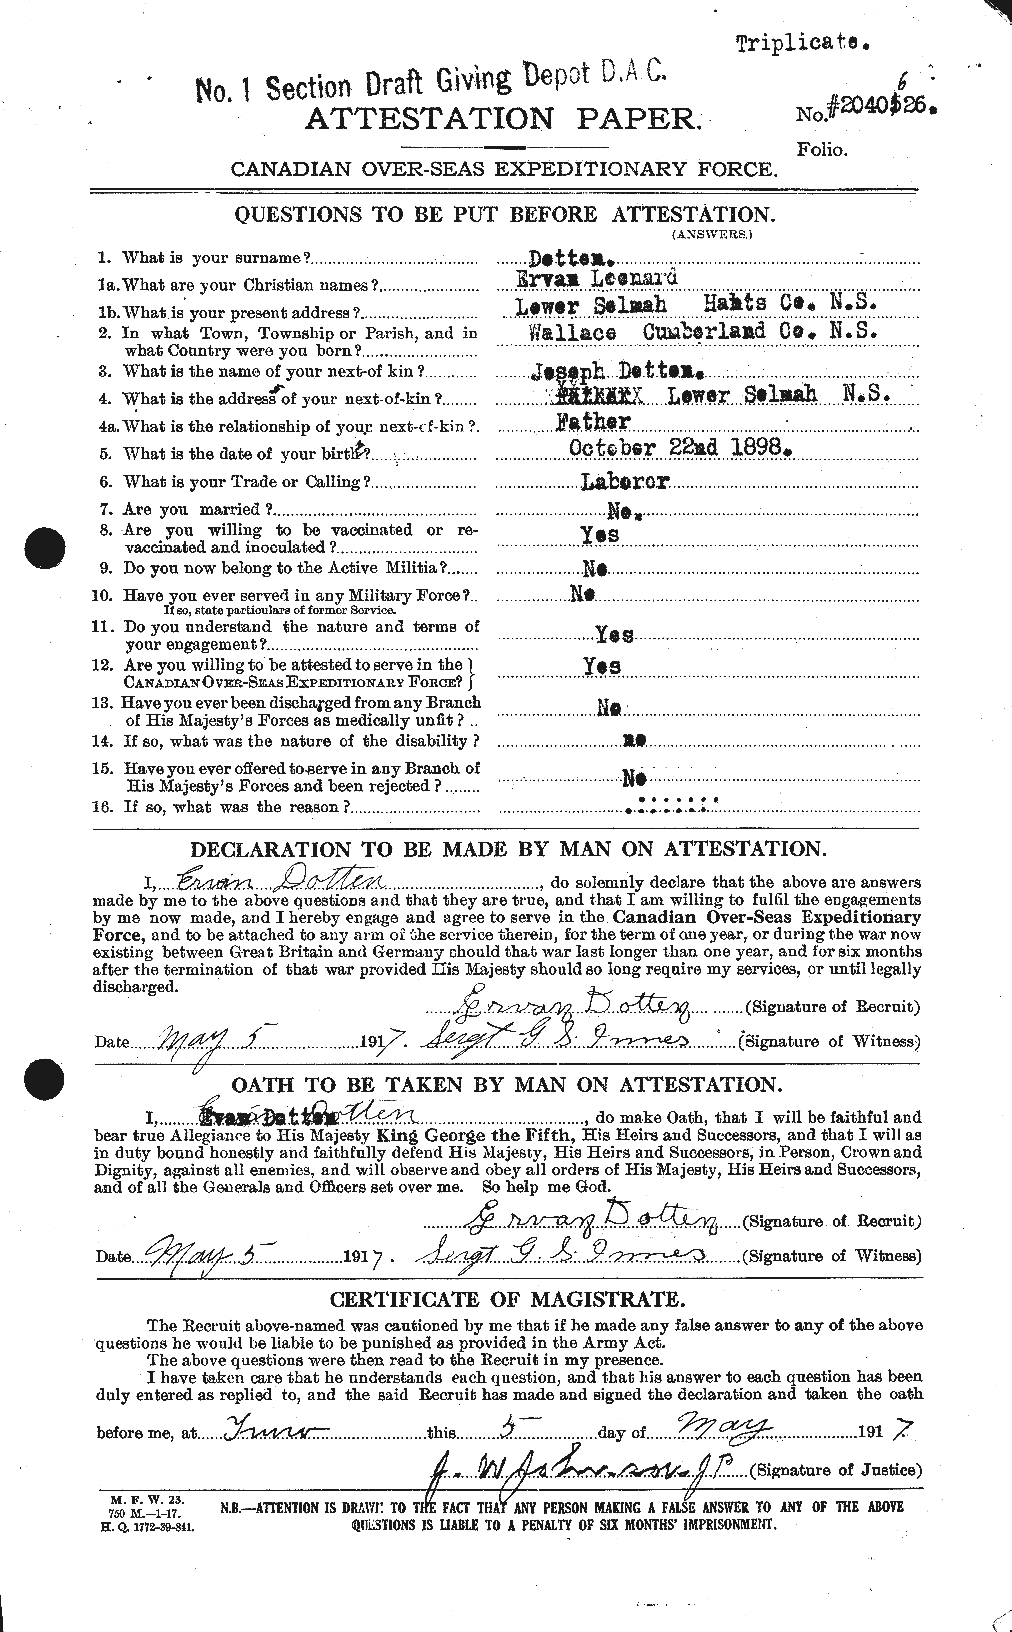 Personnel Records of the First World War - CEF 299668a